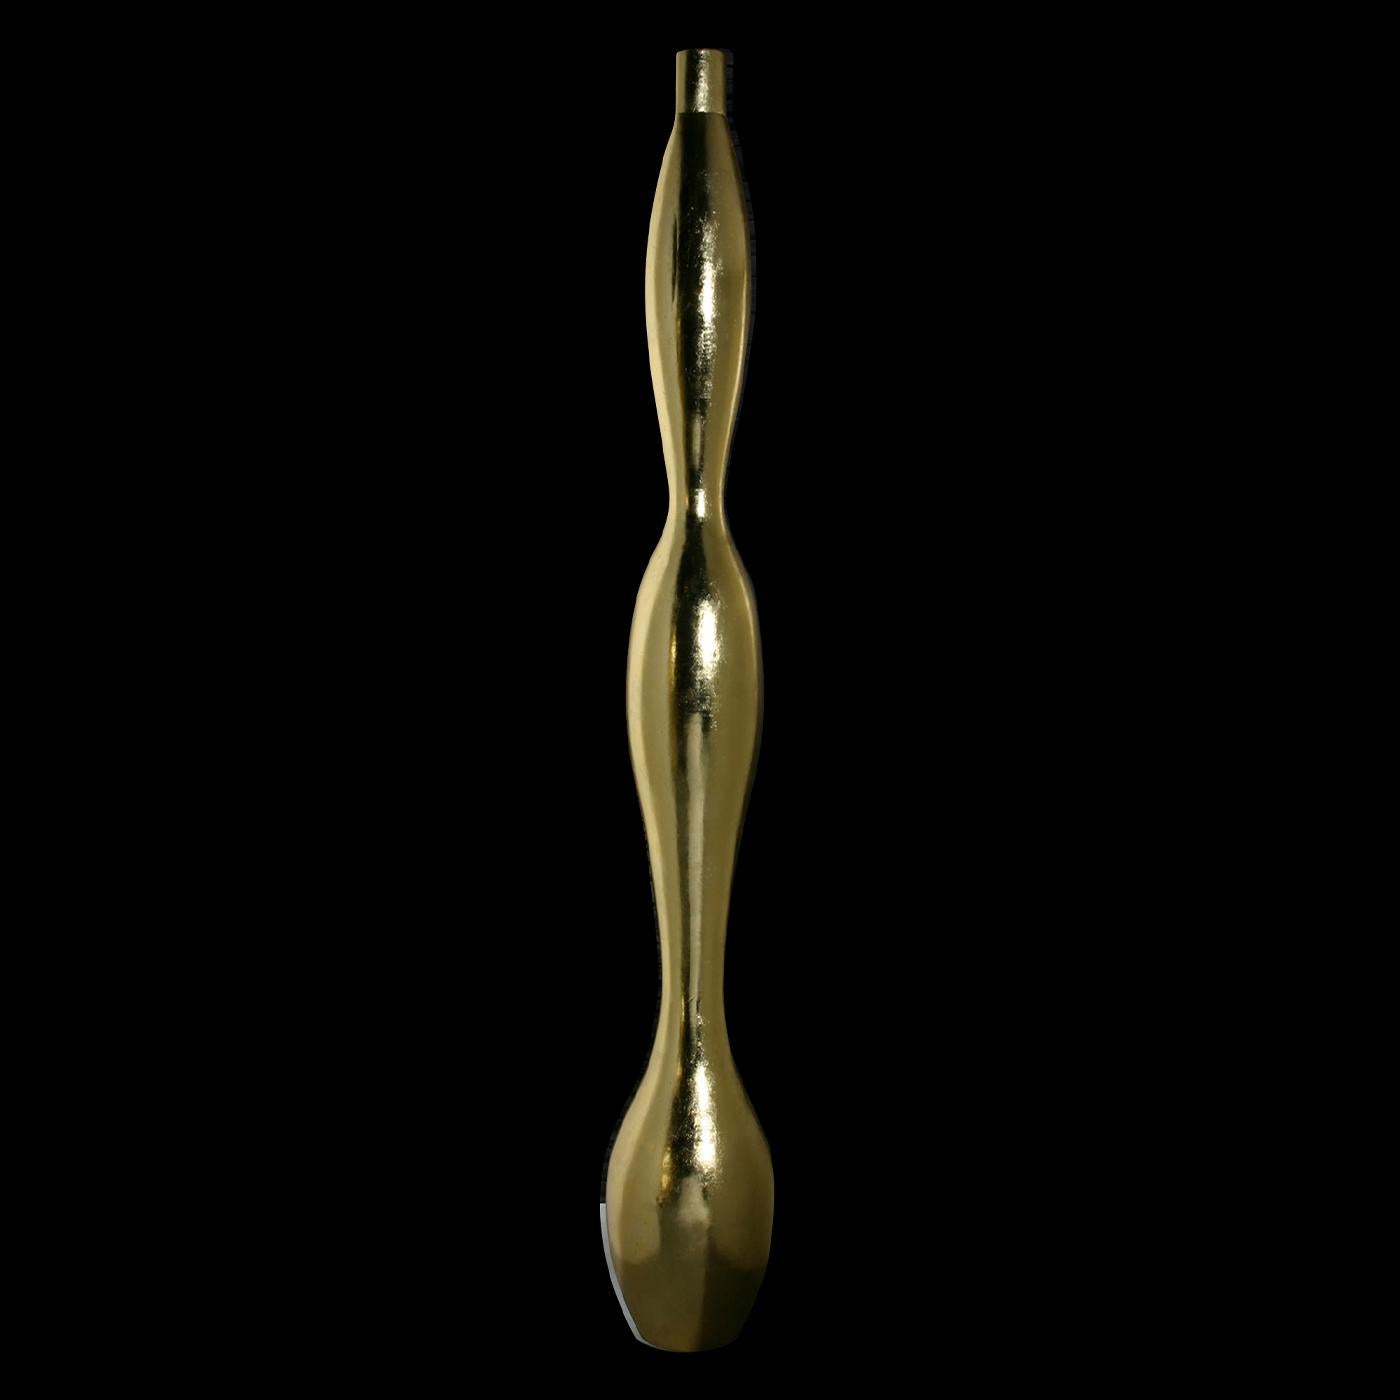 A stunning decorative piece ideally matched with the Madam Vase in the same finish, the Copine (young girl in French) boasts a tall (231cm), sinuous shape entirely crafted of resin and enriched with gold leaf, Bold and sophisticated, this